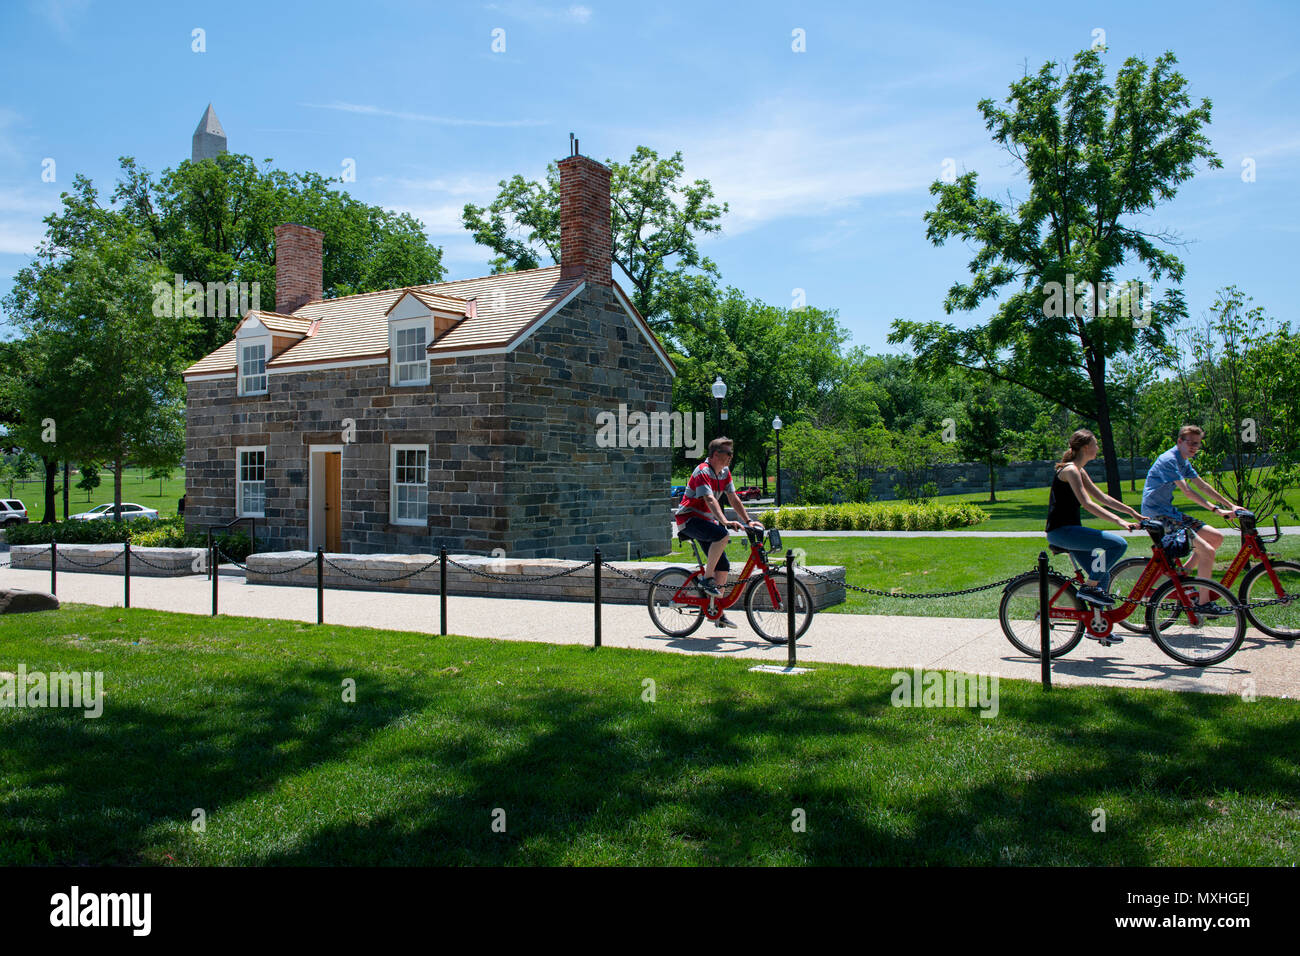 USA Washington DC Lock Keepers House on the National Mall in the Constitution Gardens Lockkeepers House restored Capitol Bike Share Stock Photo